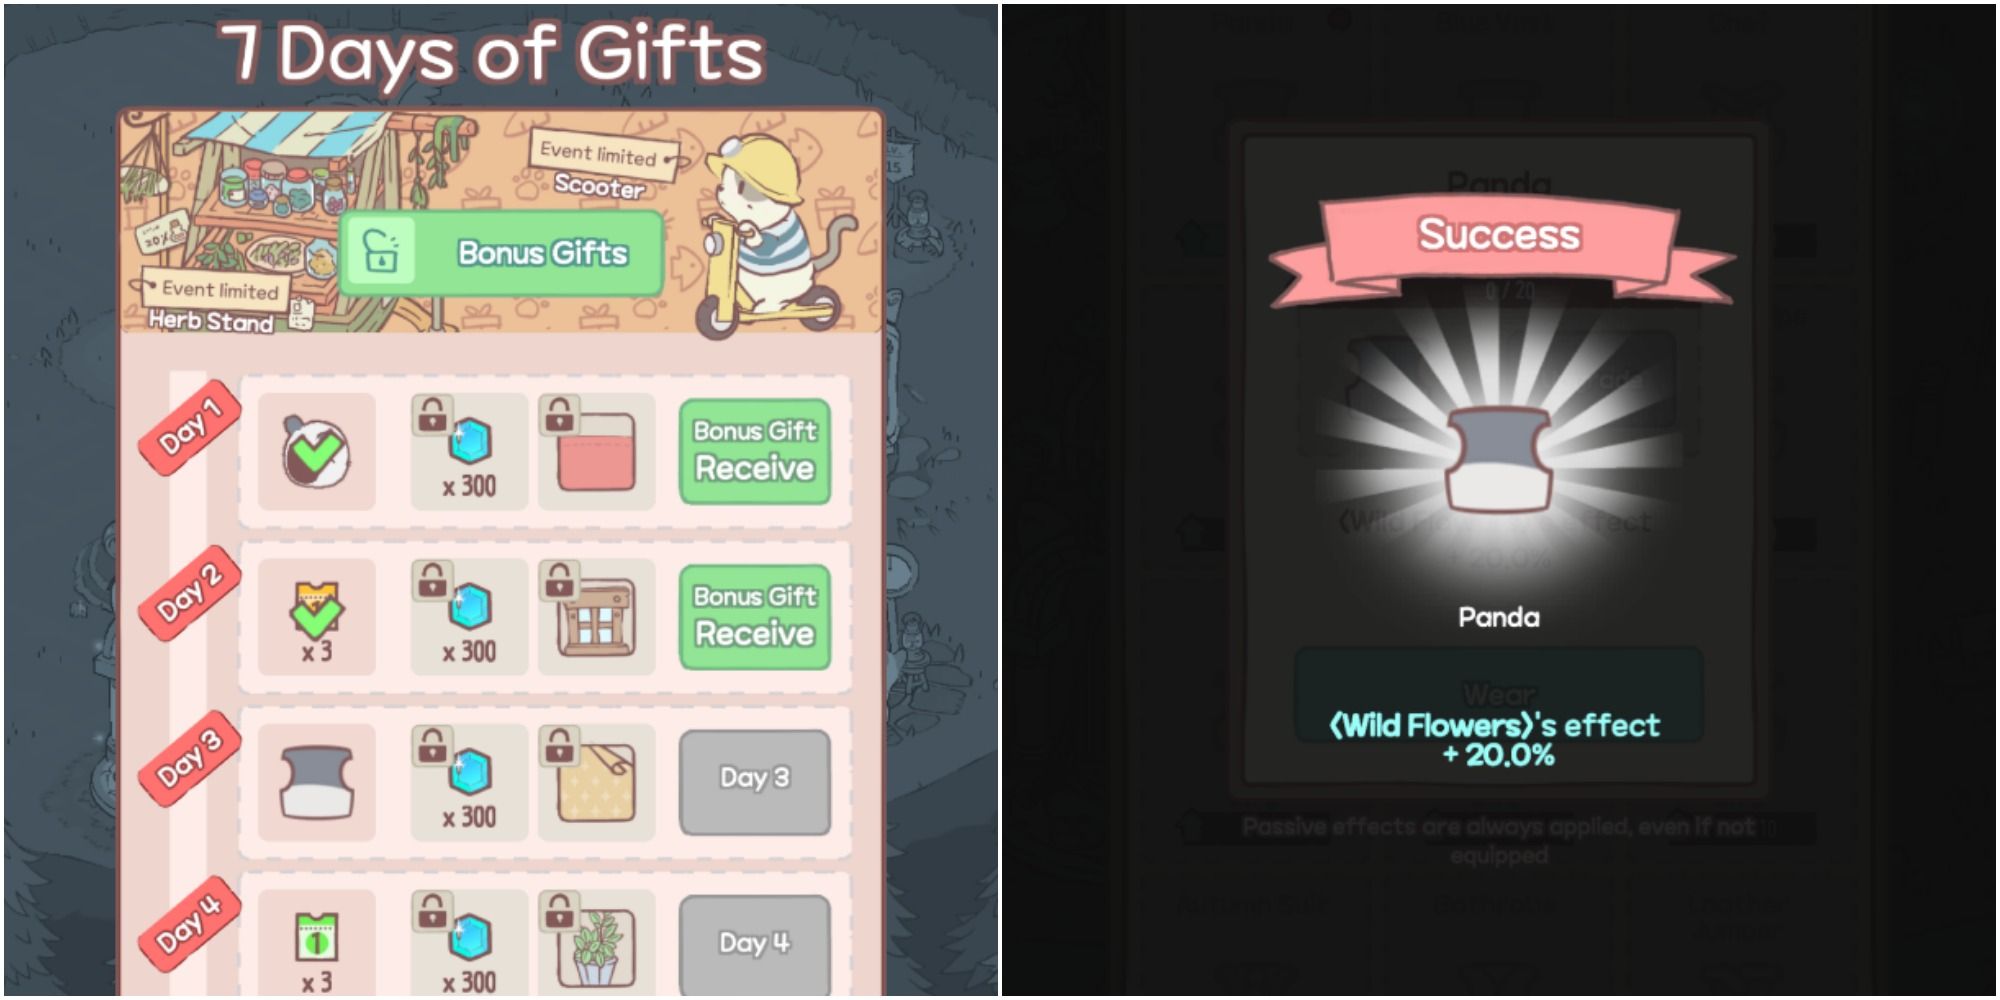 Split image of 7 Days of Gifts menu and successfully unlocking panda outfit